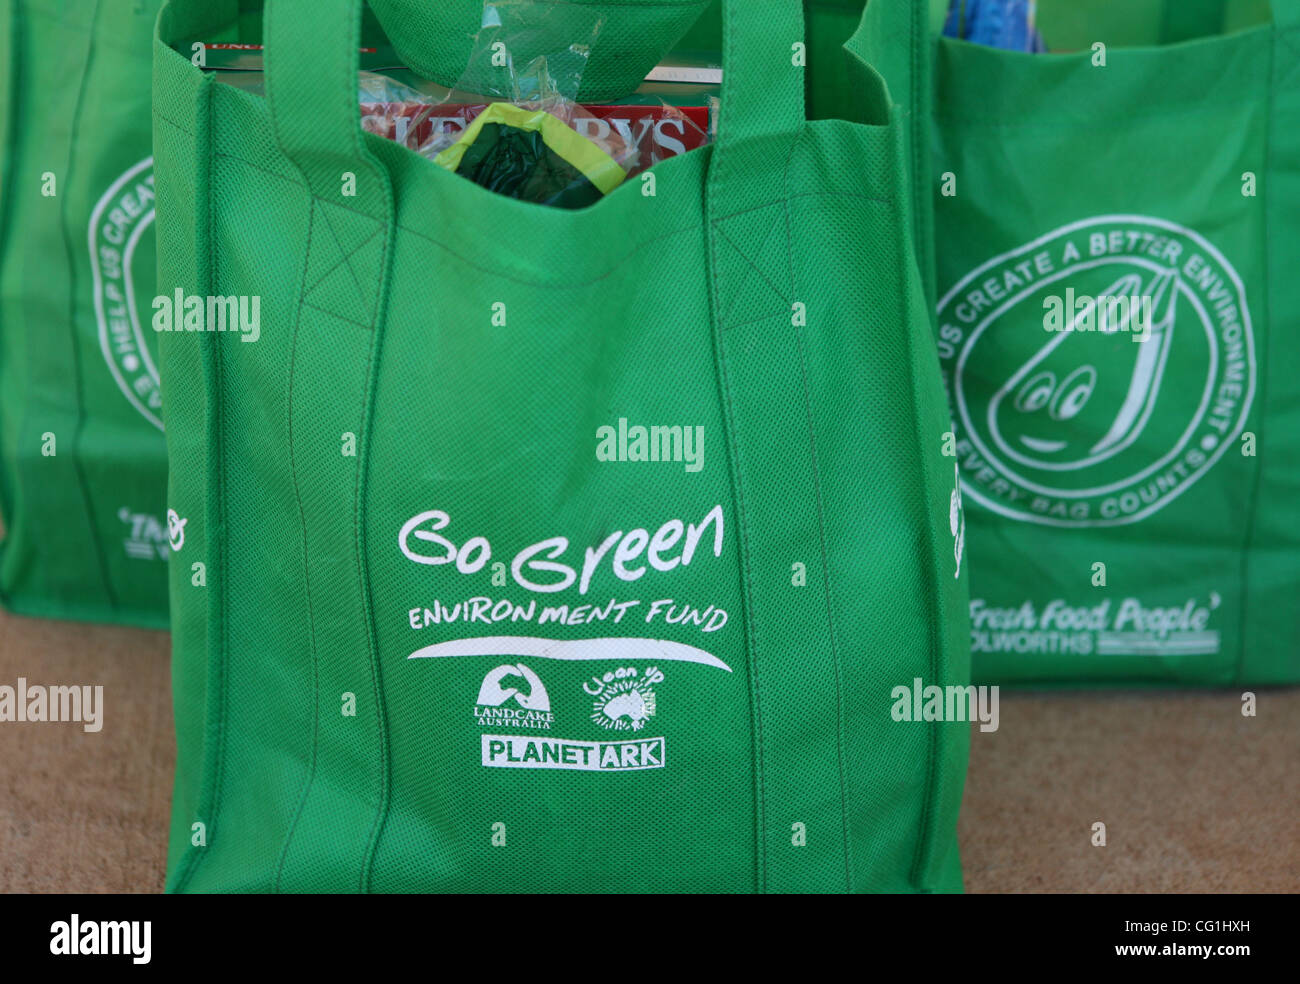 Aug 17, 2007 - Alice Springs, Northern Territory, Australia - Since March  2002, Coles and Bi-Lo have sold over 5 million reusable bags. "Our 'Go Green'  bags make shopping easier for our